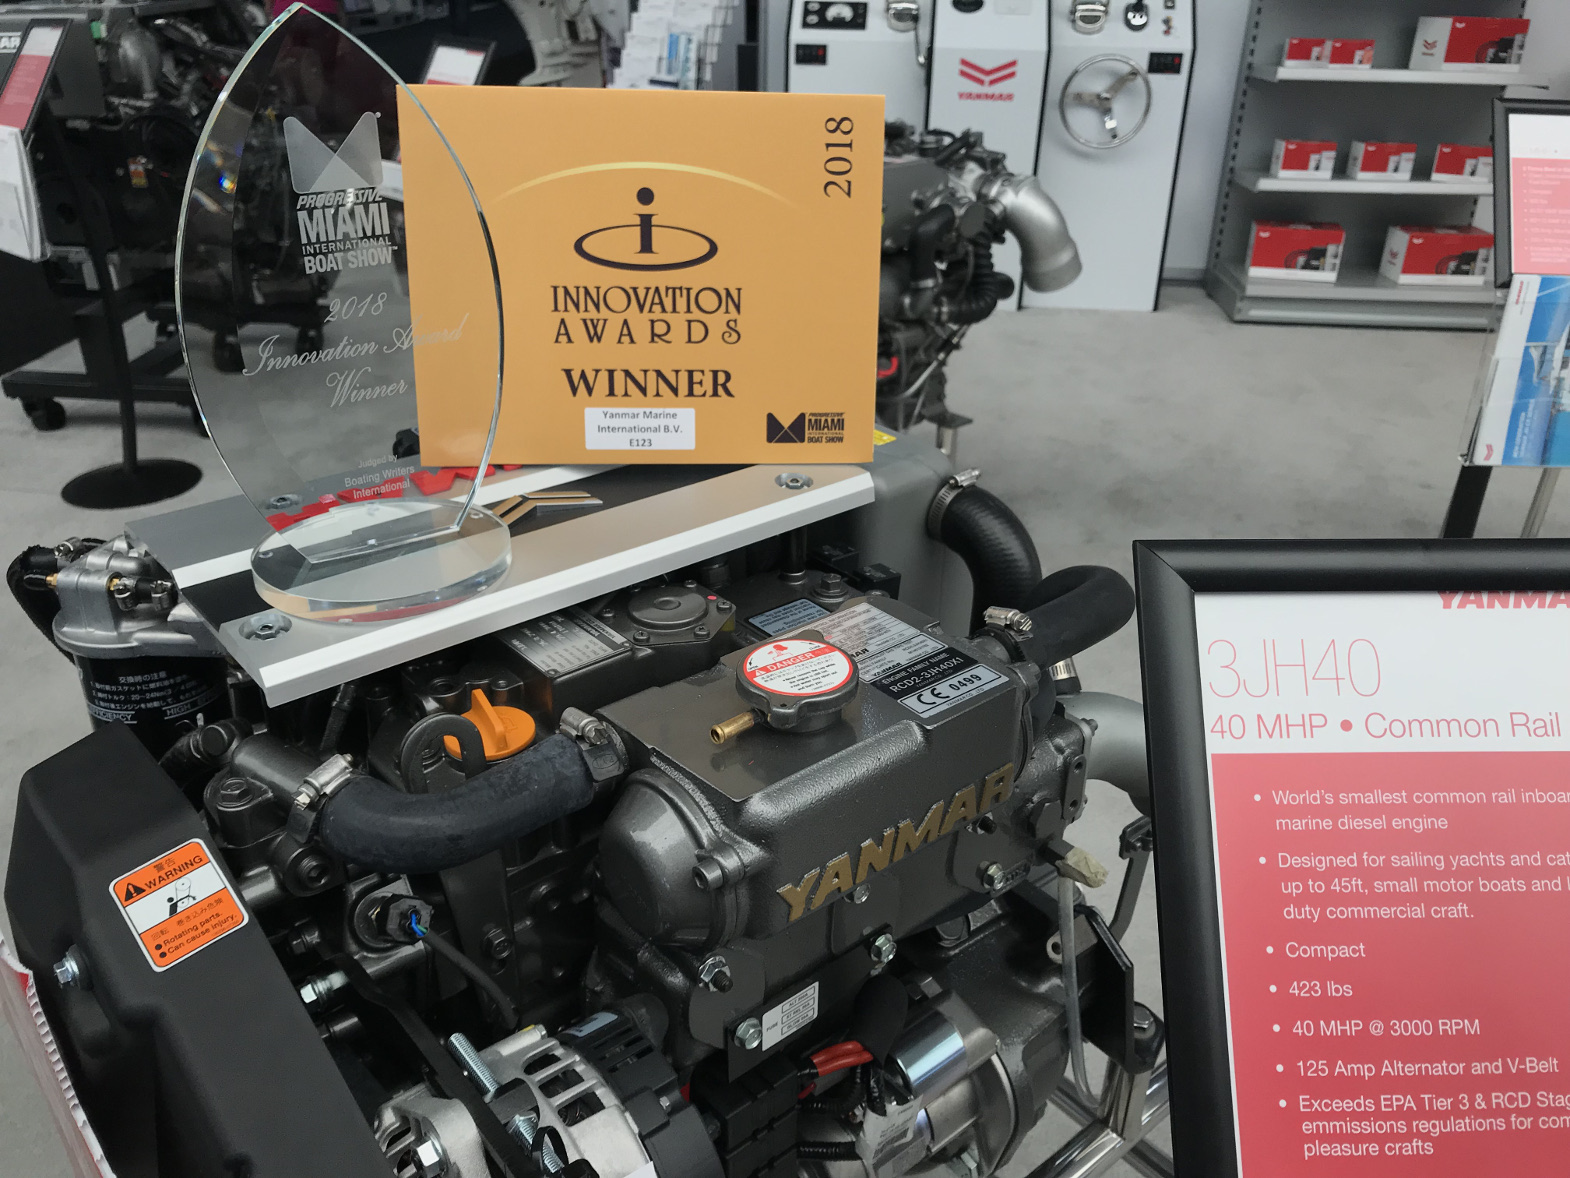 YANMAR 3JH40 with the Innovation Award